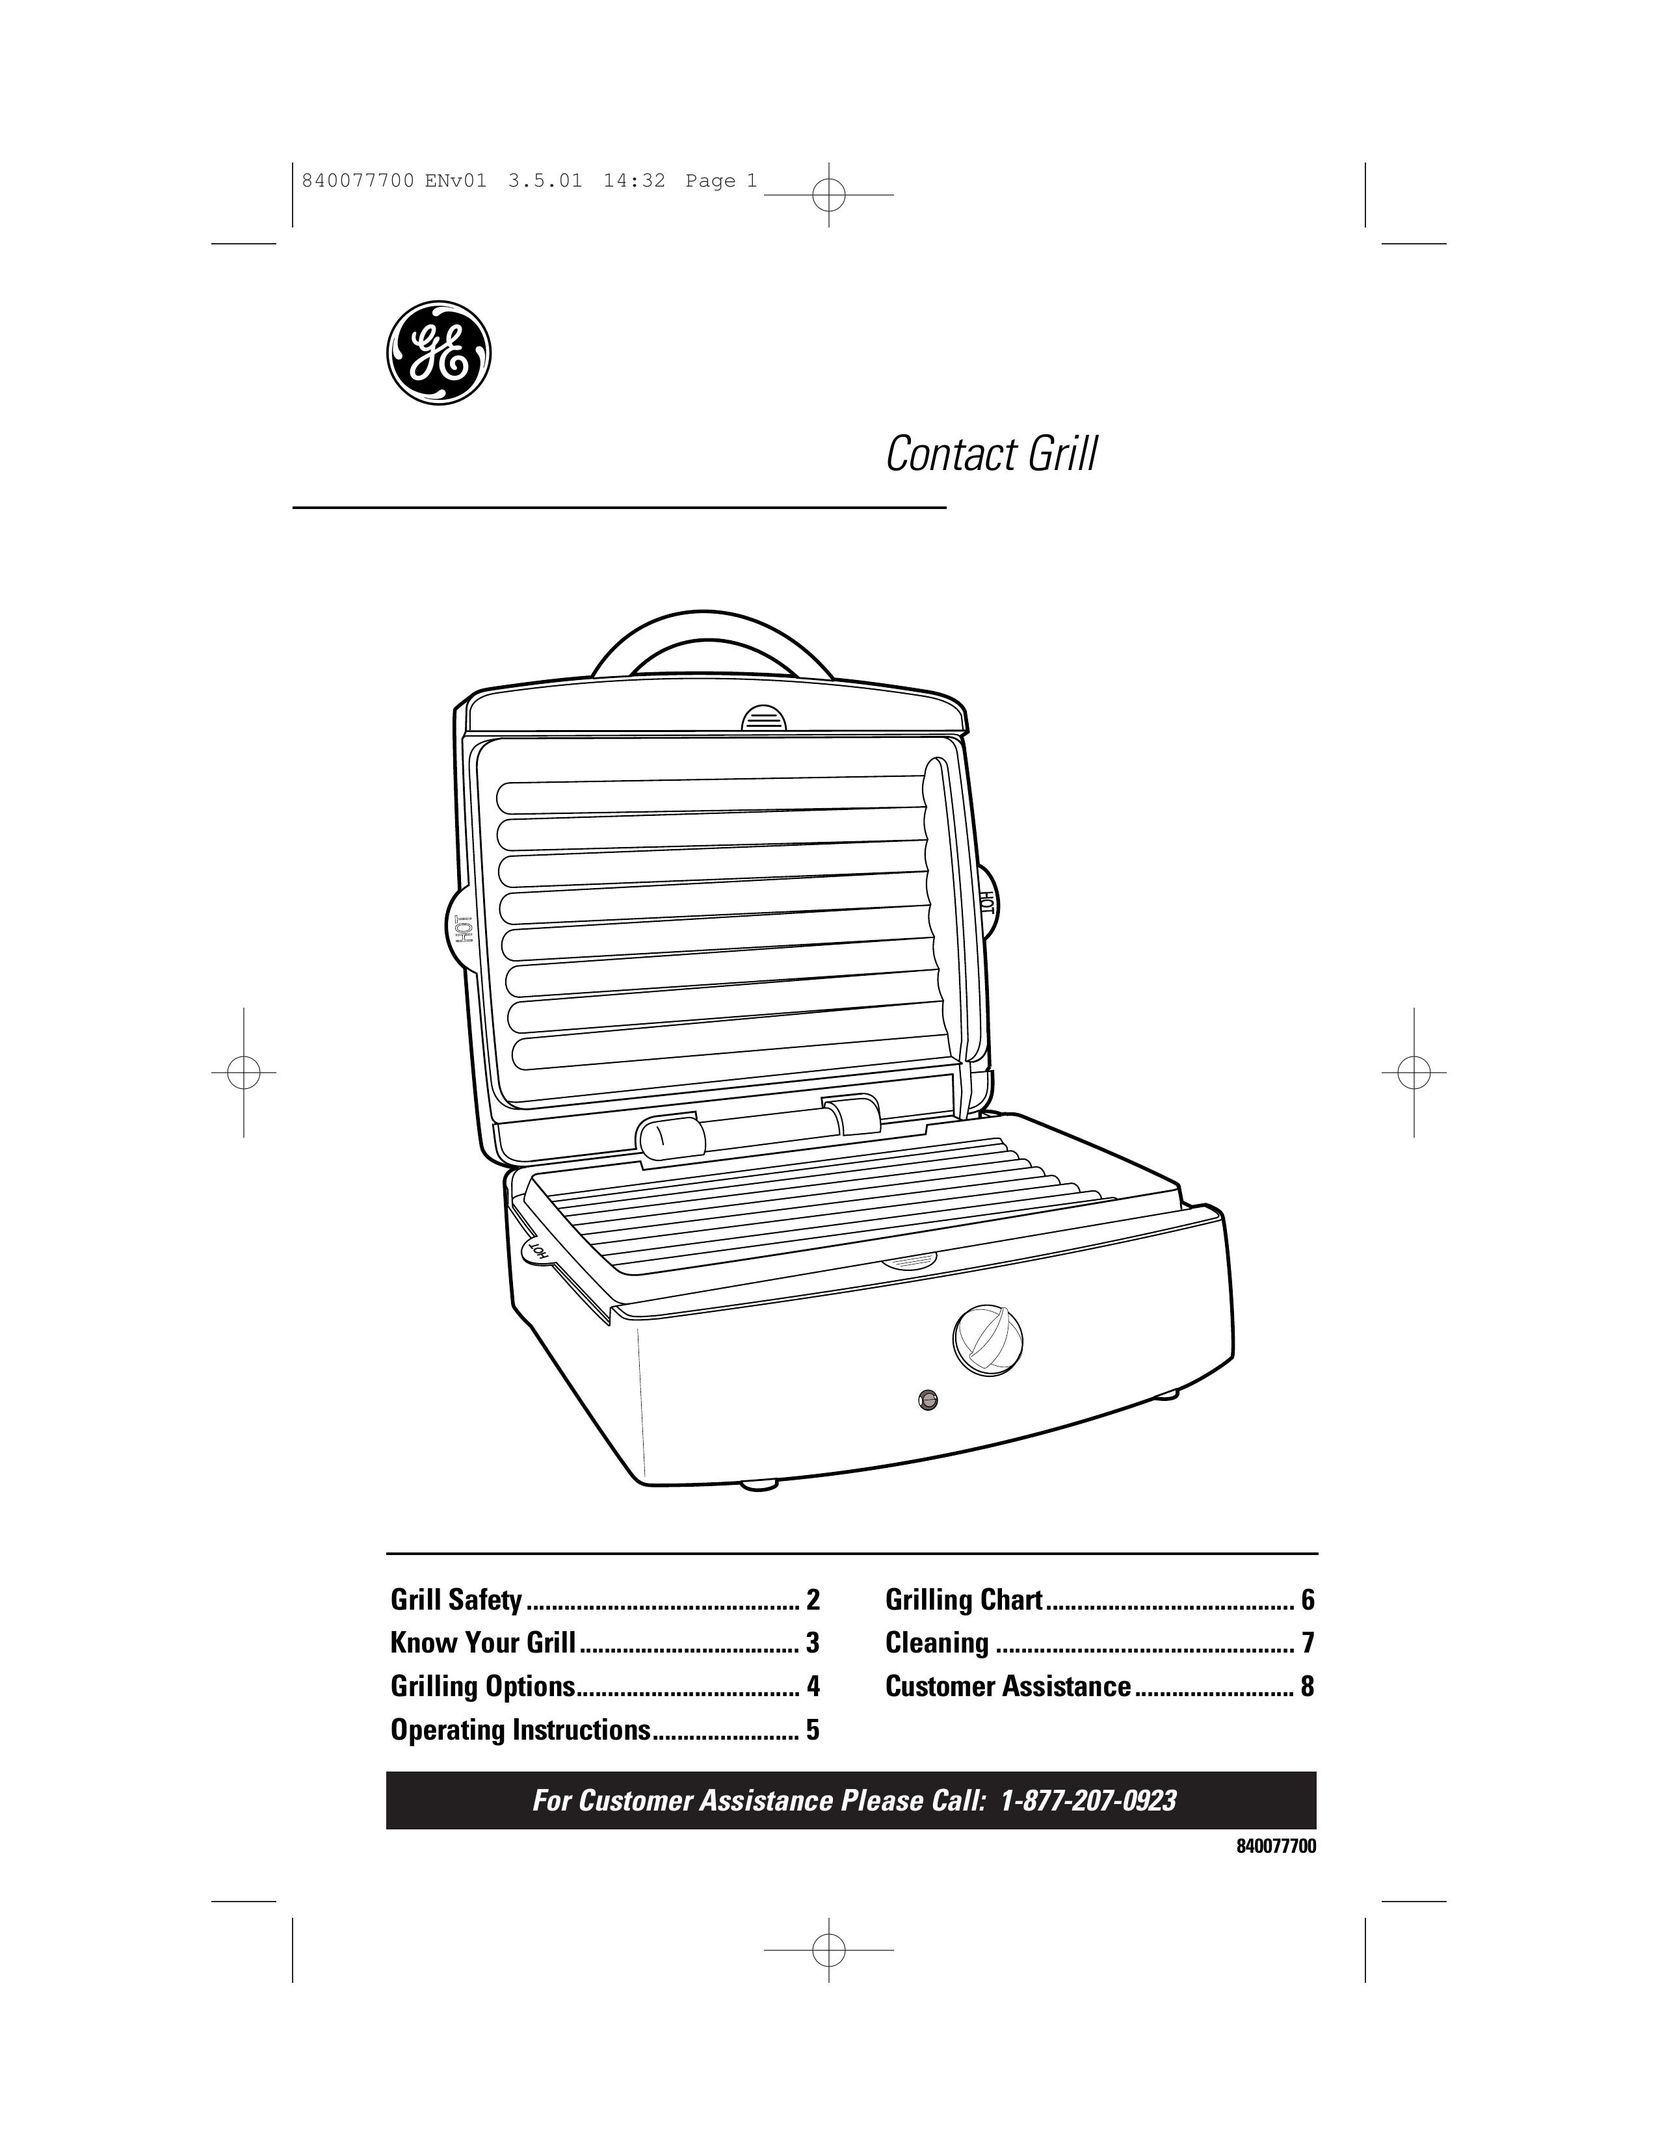 GE 840077700 Kitchen Grill User Manual